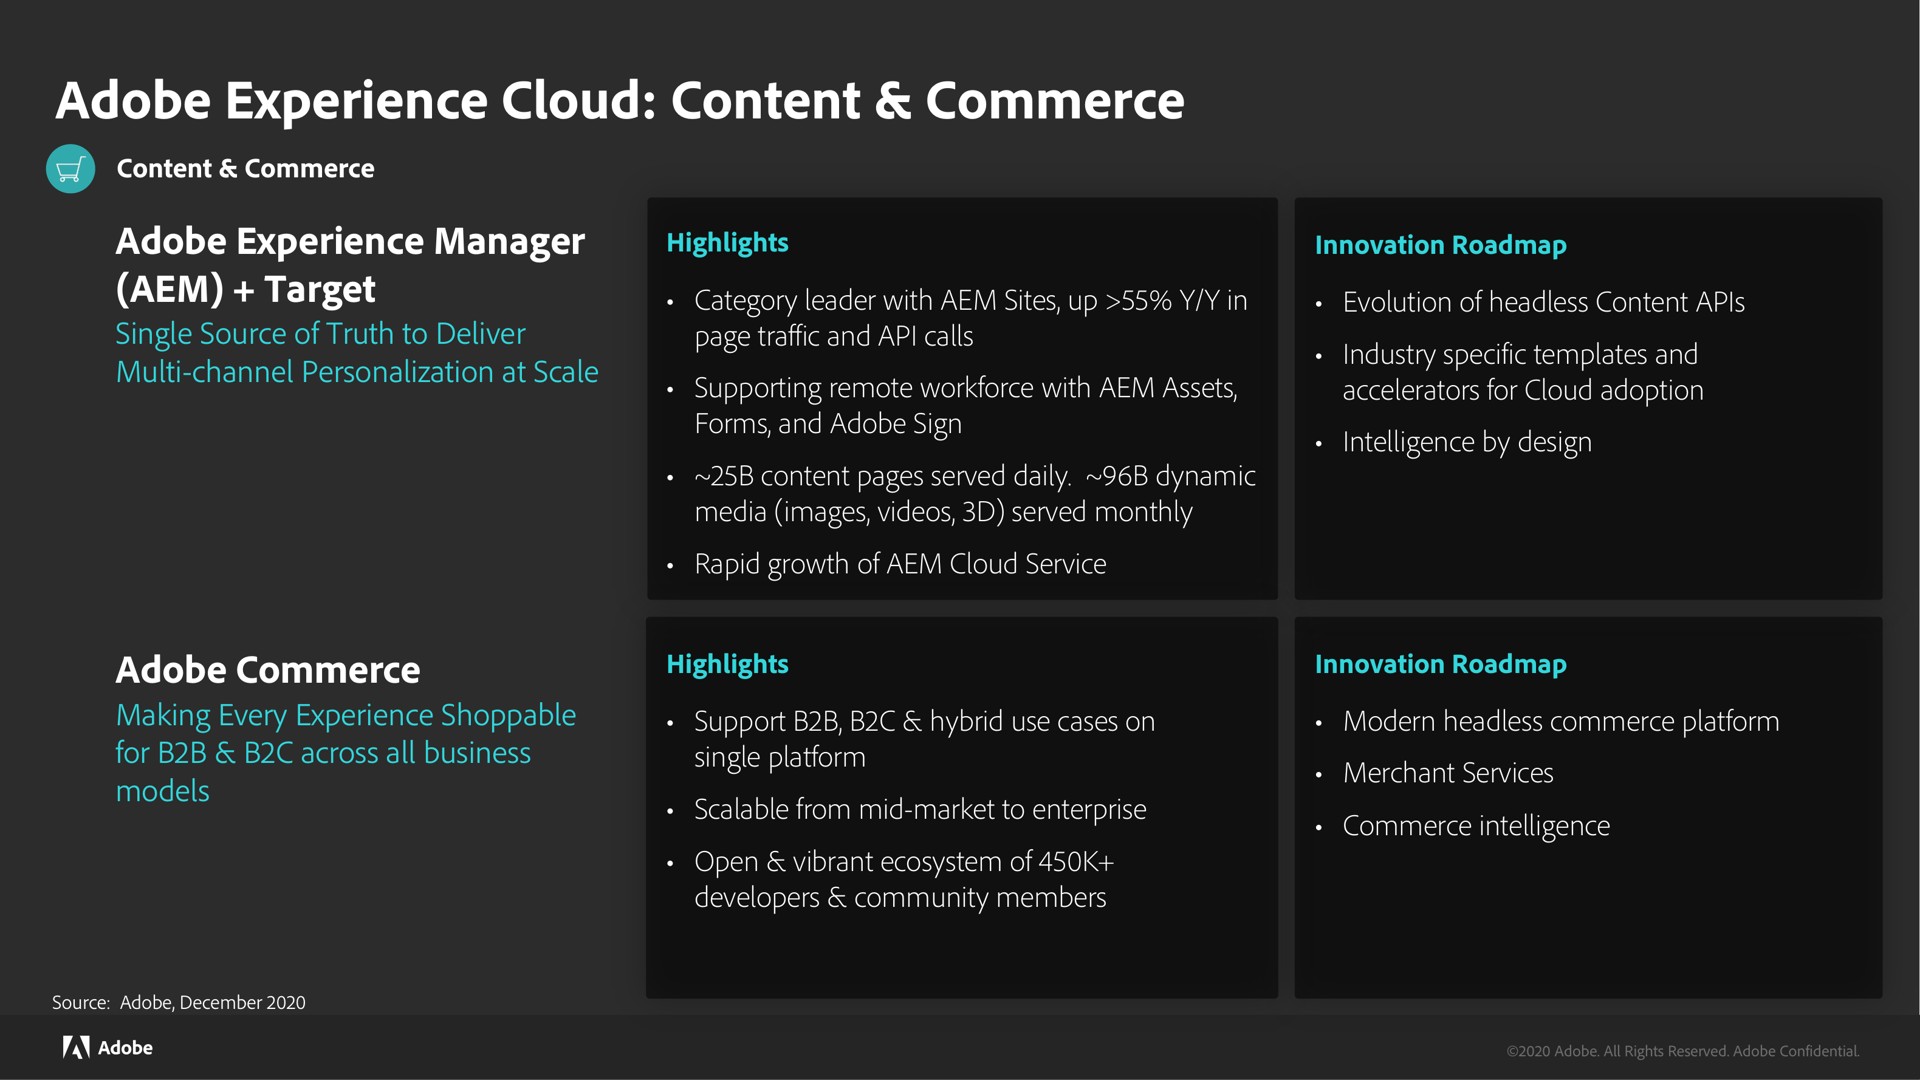 adobe experience cloud content commerce | Adobe